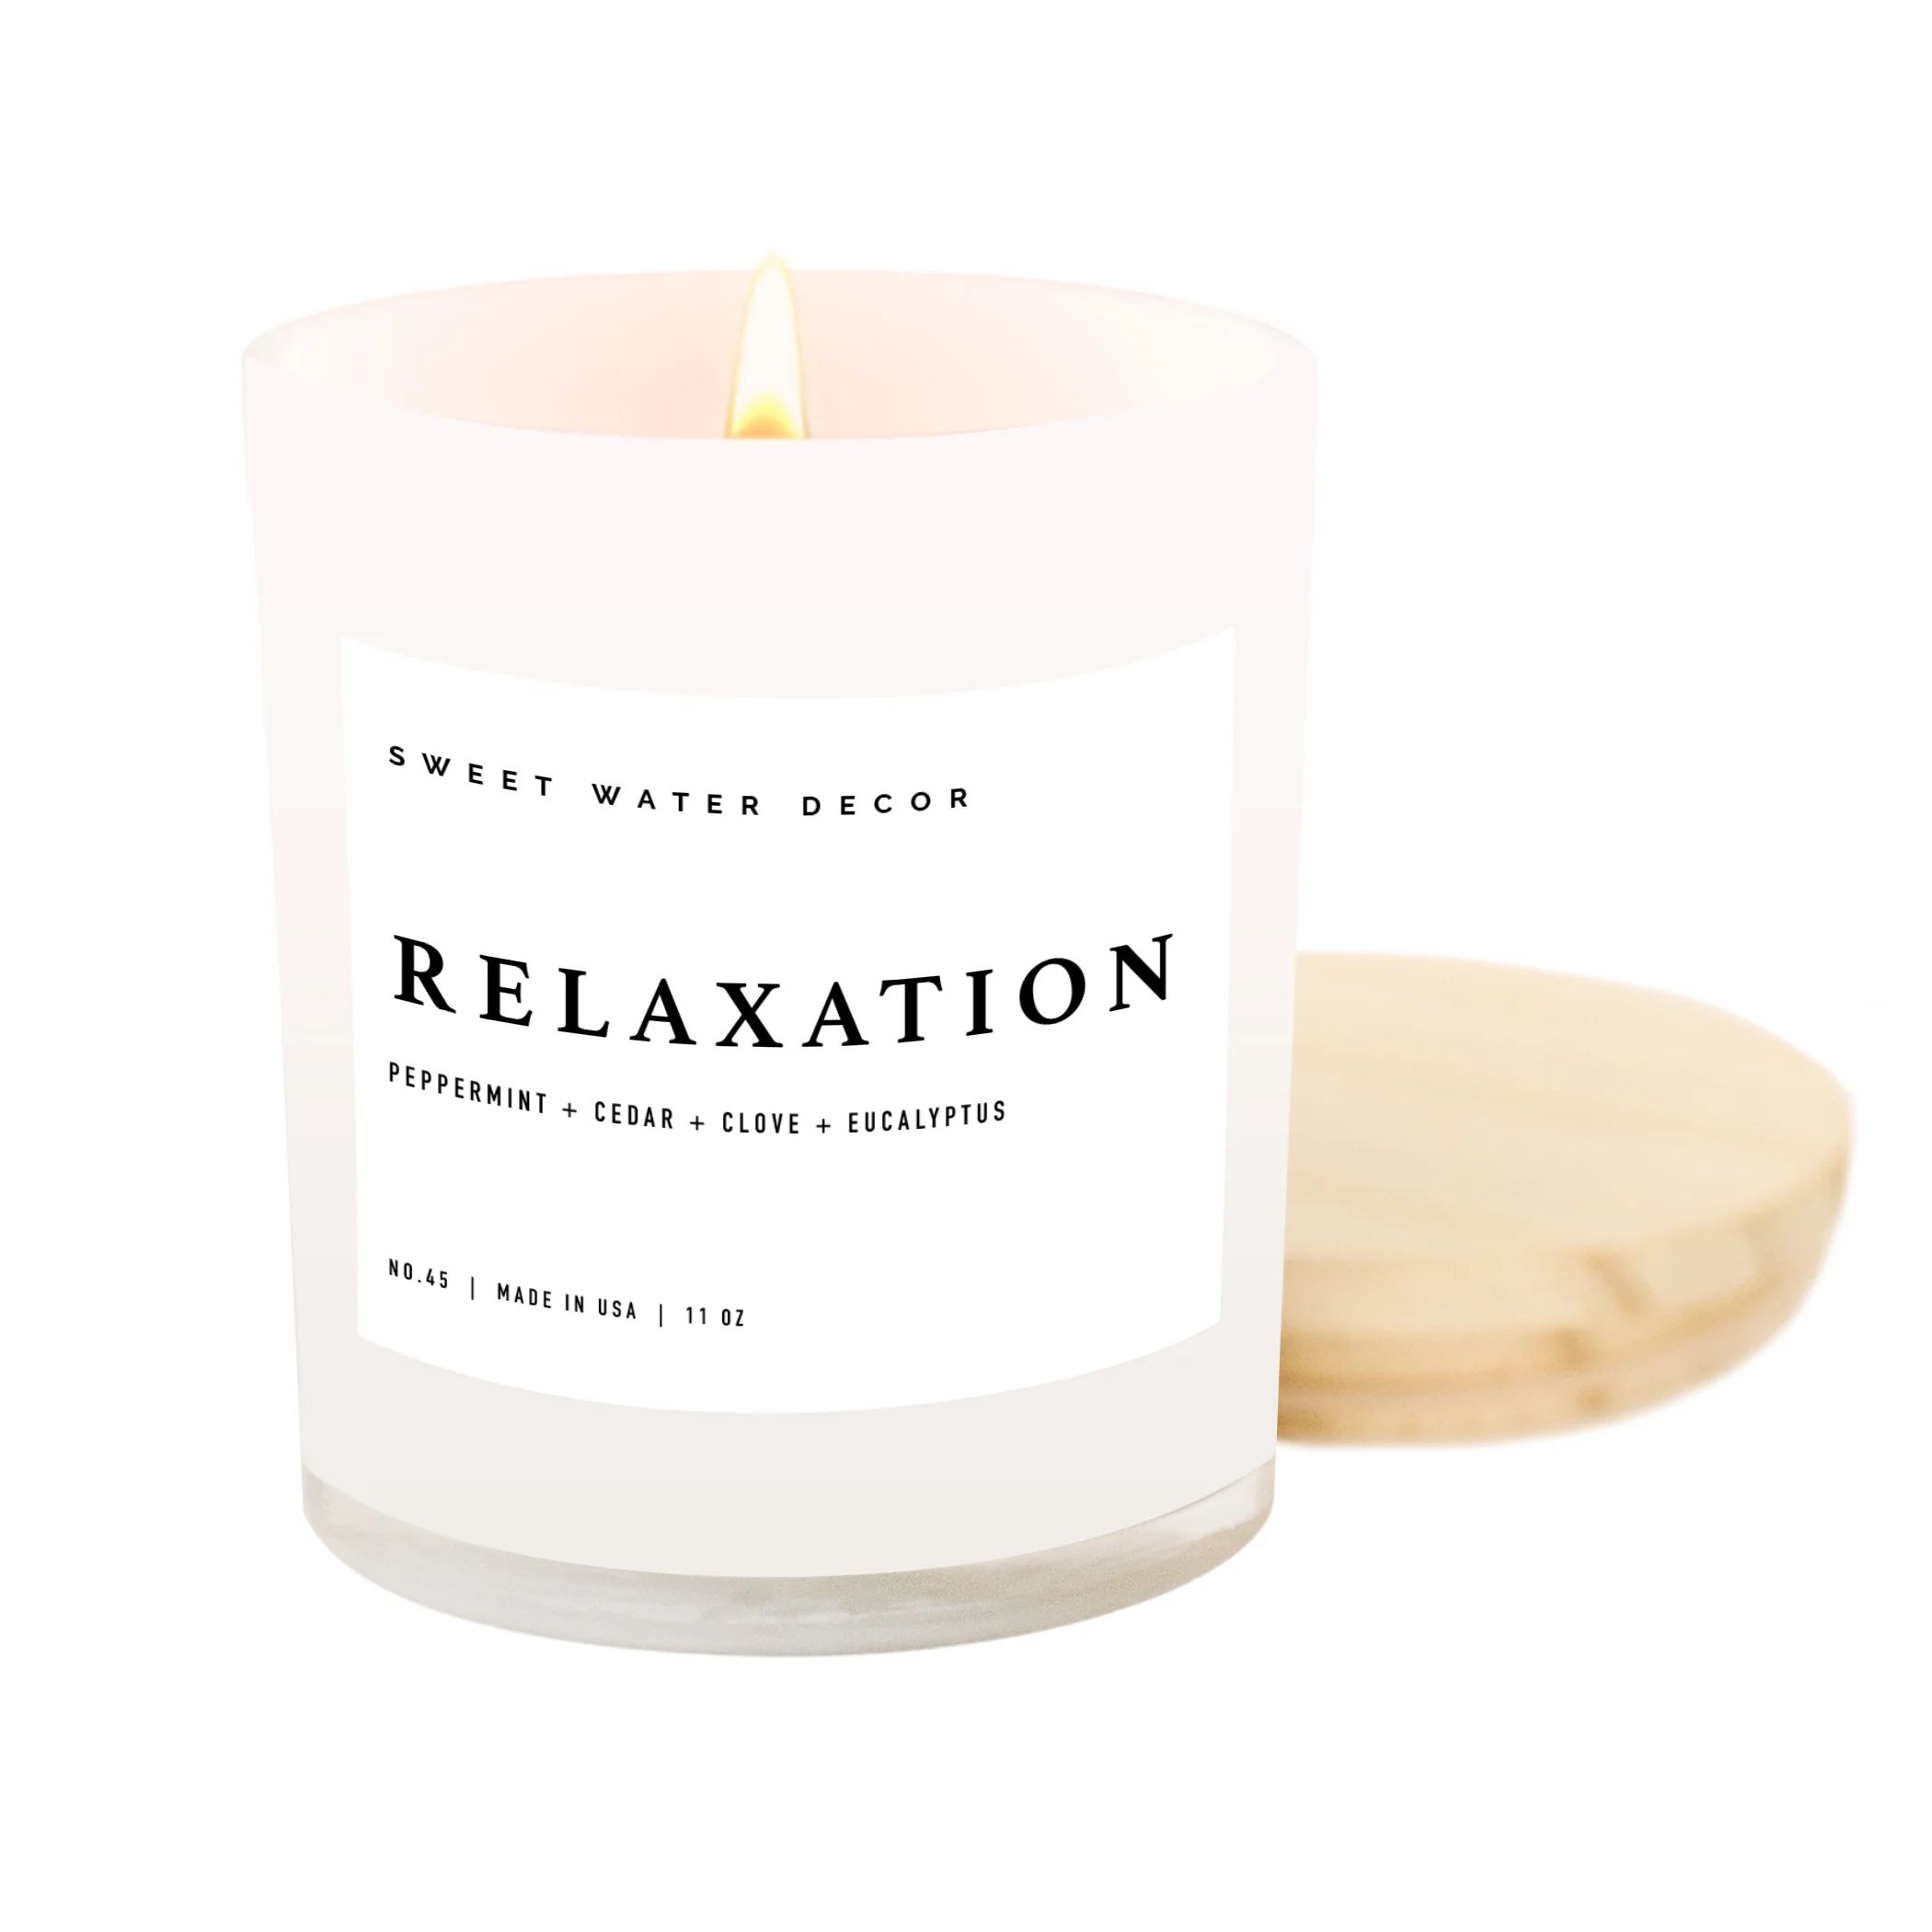 Relaxation Soy Candle | White Jar + Wood Lid | Sweet Water Decor, LLC